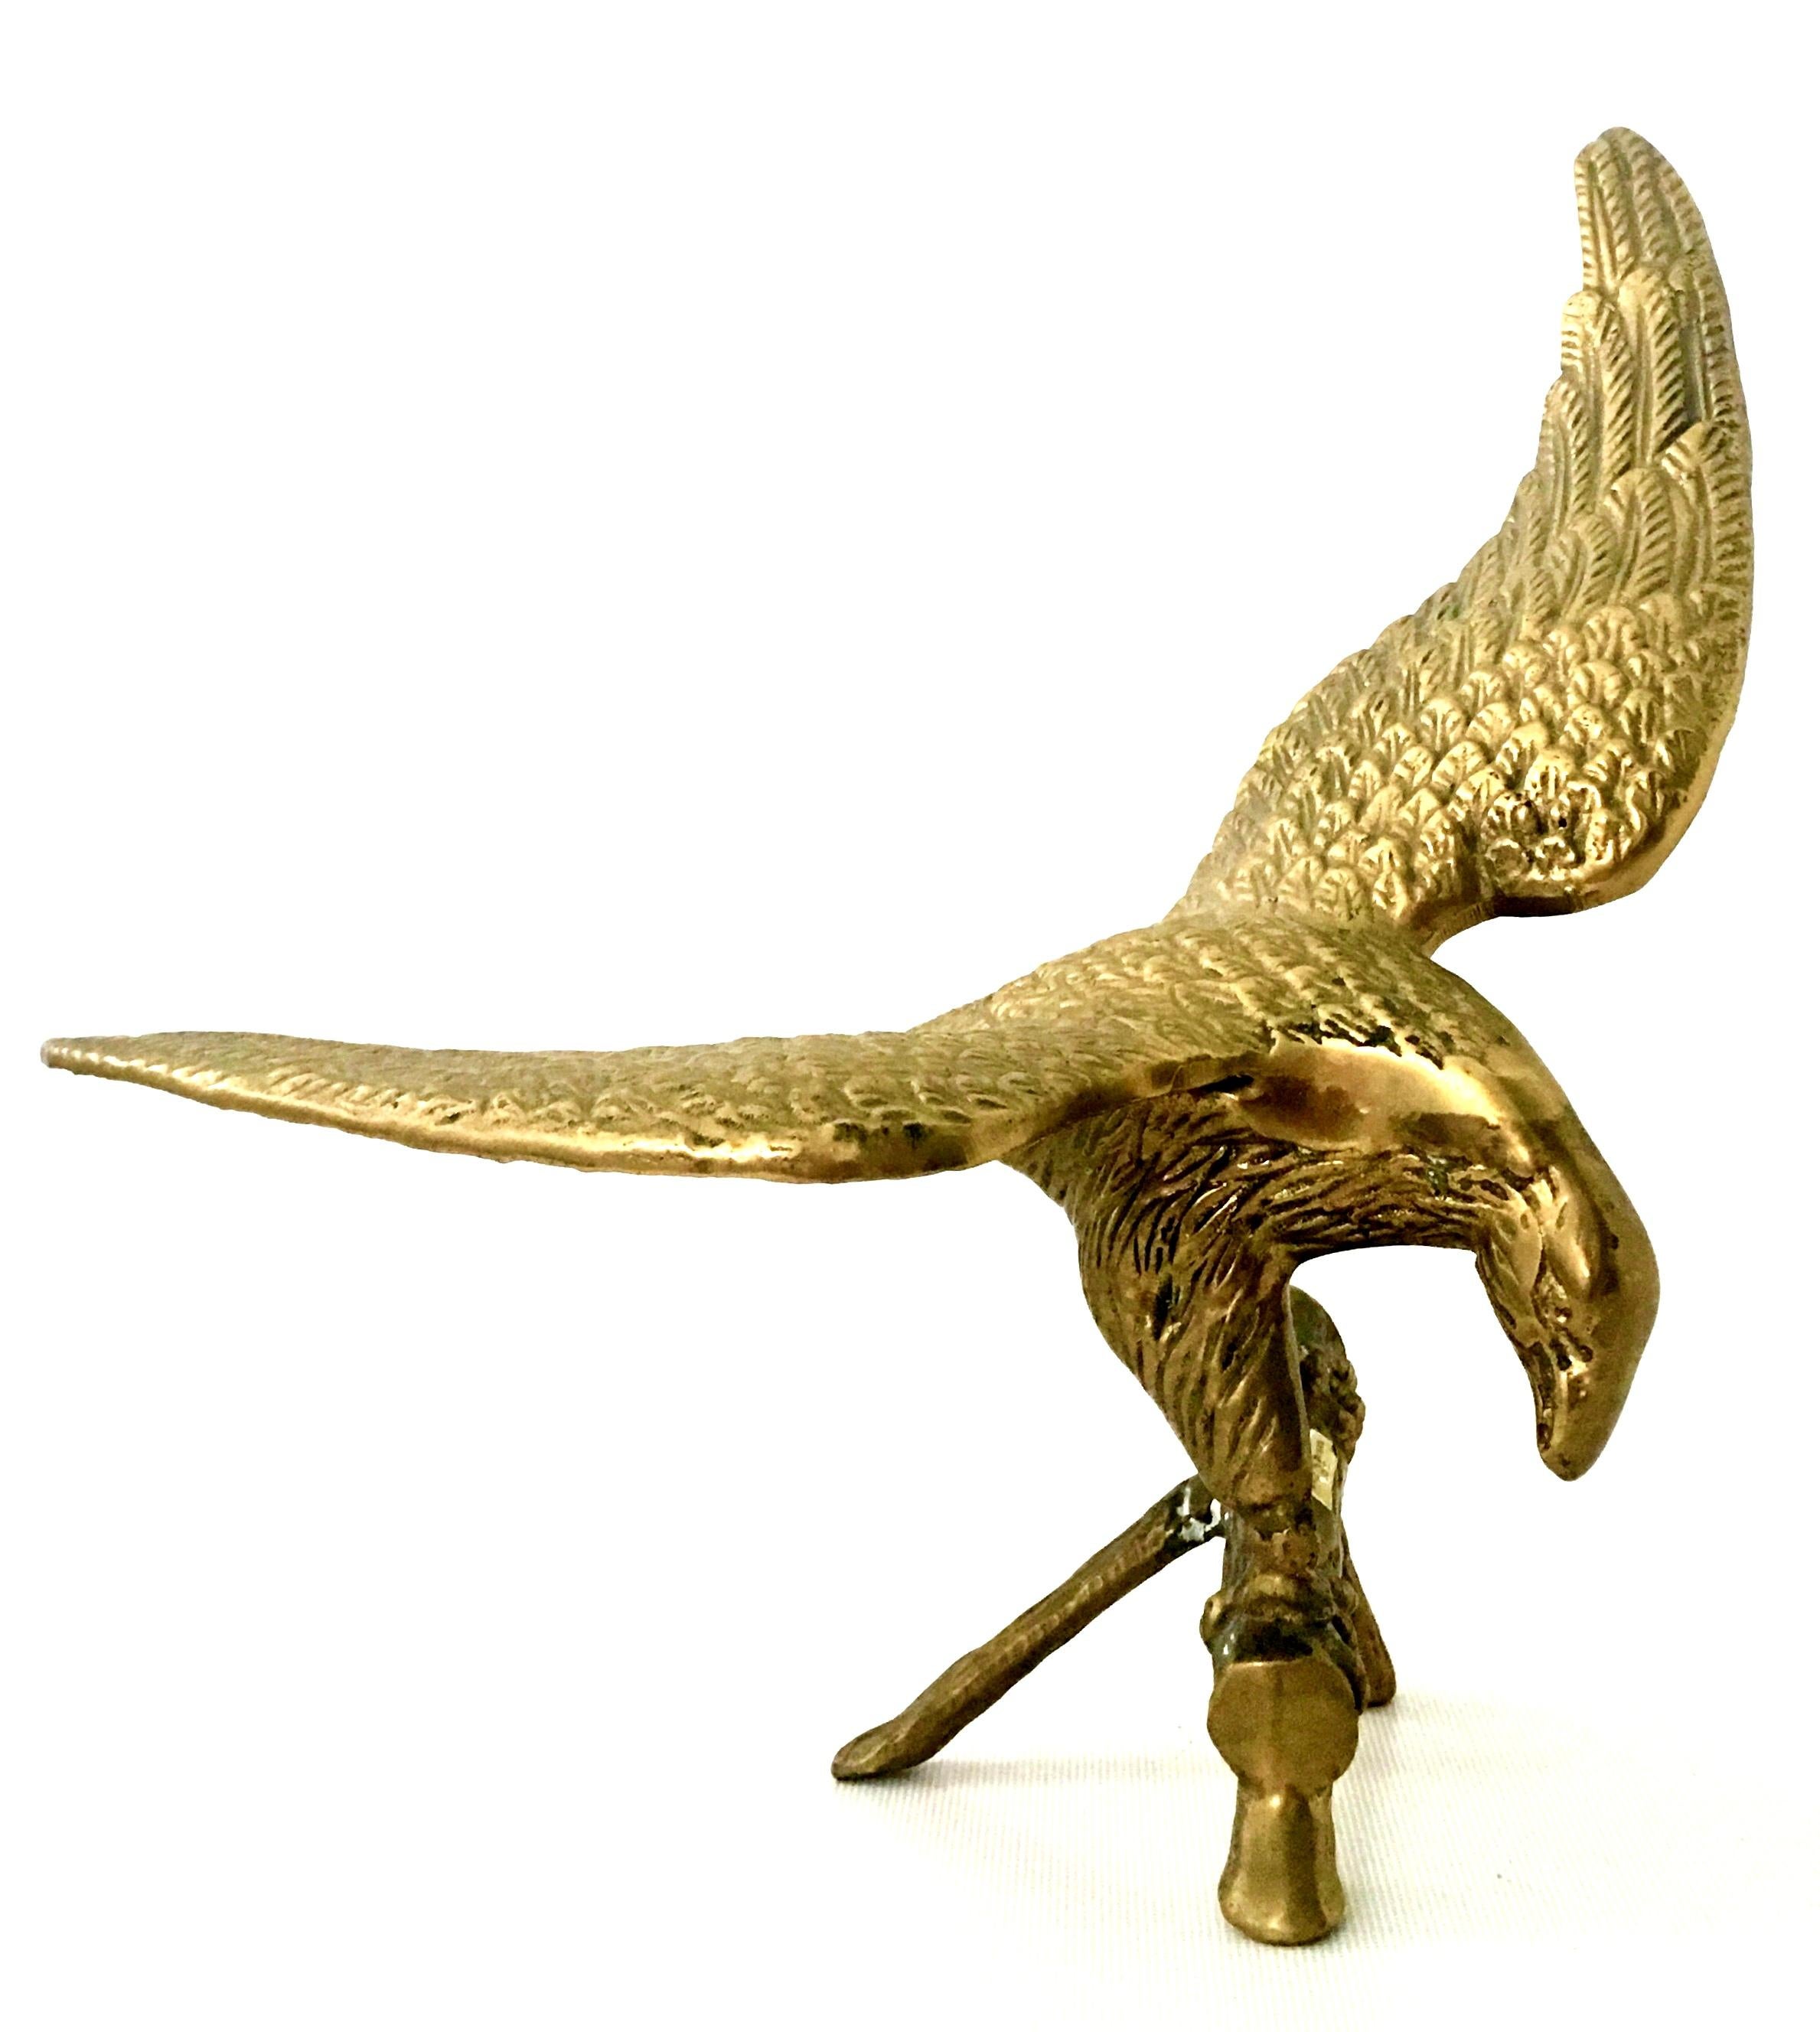 20th Century polished solid brass perched eagle sculpture. Features a finely crafted and expertly detailed eagle about to take flight perched on a faux bois tree branch.